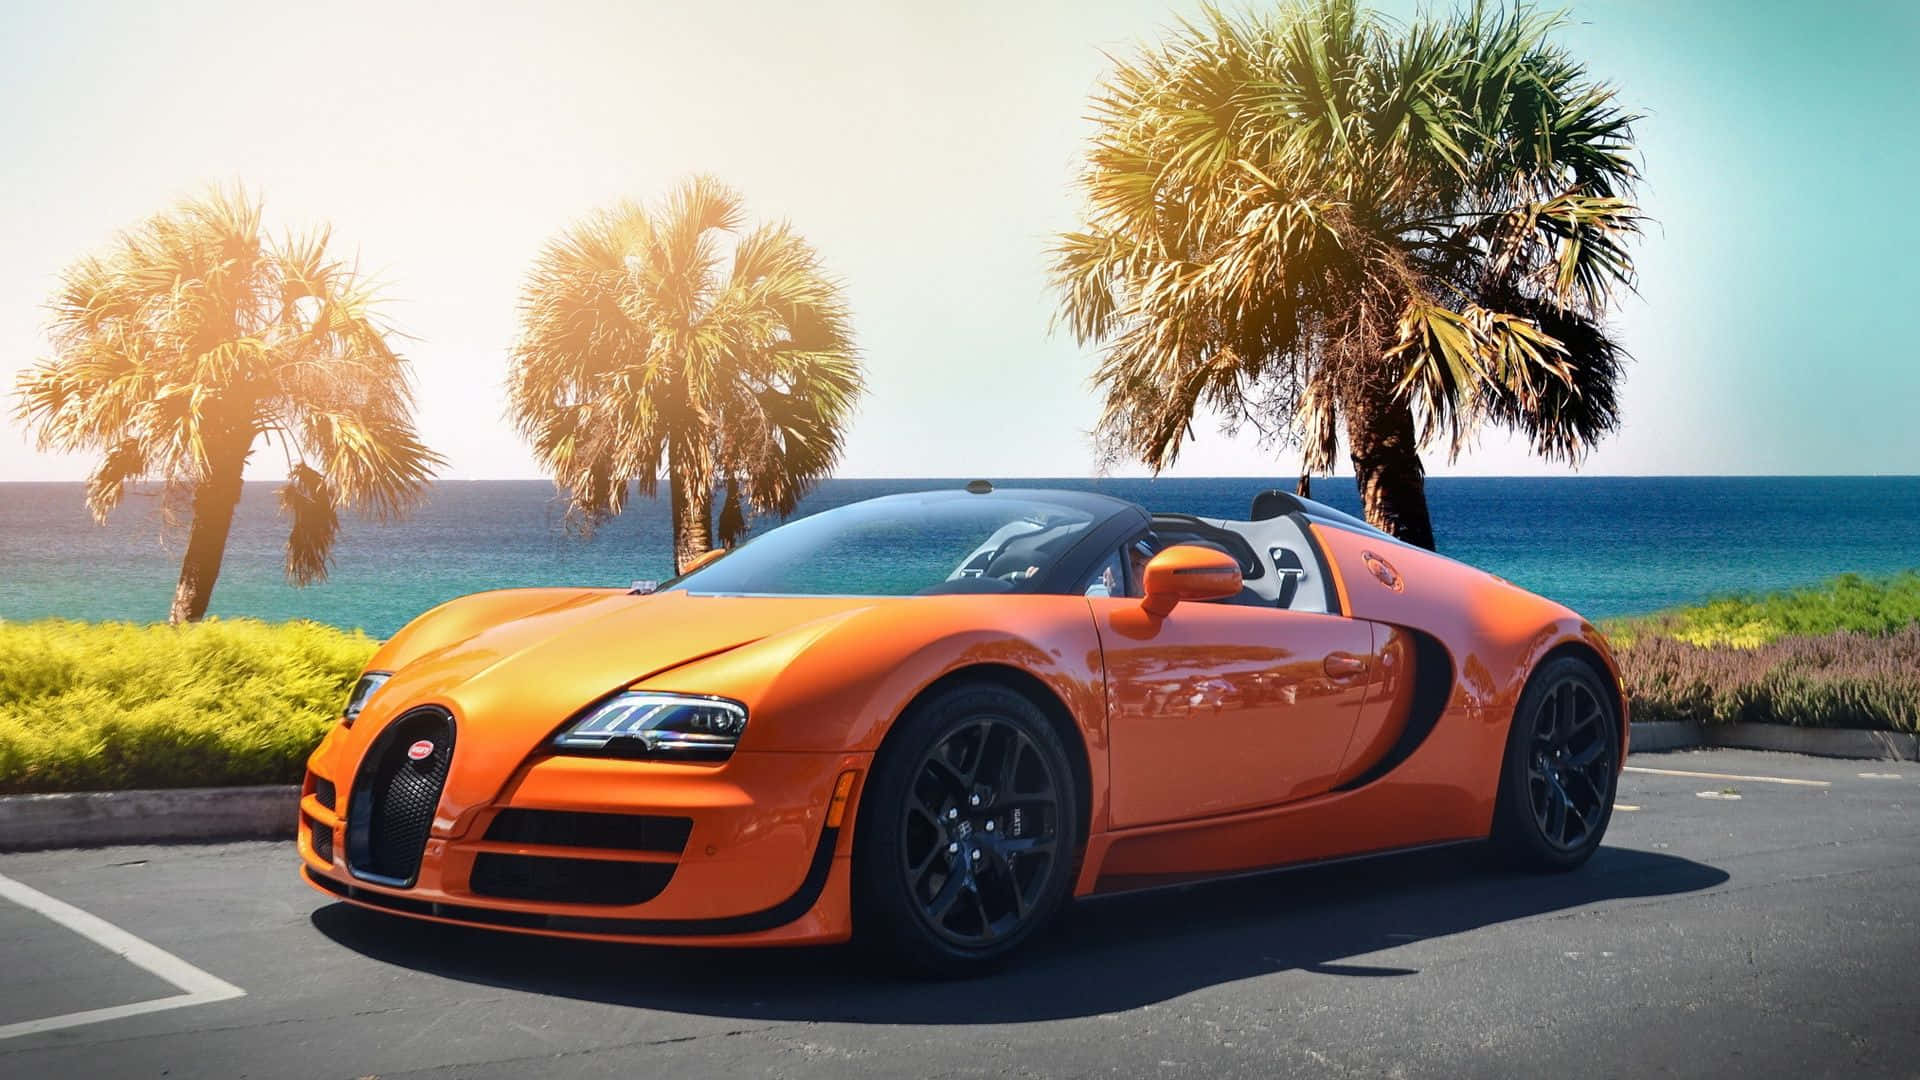 Bugatti Veyron S - A Car Parked In Front Of The Ocean